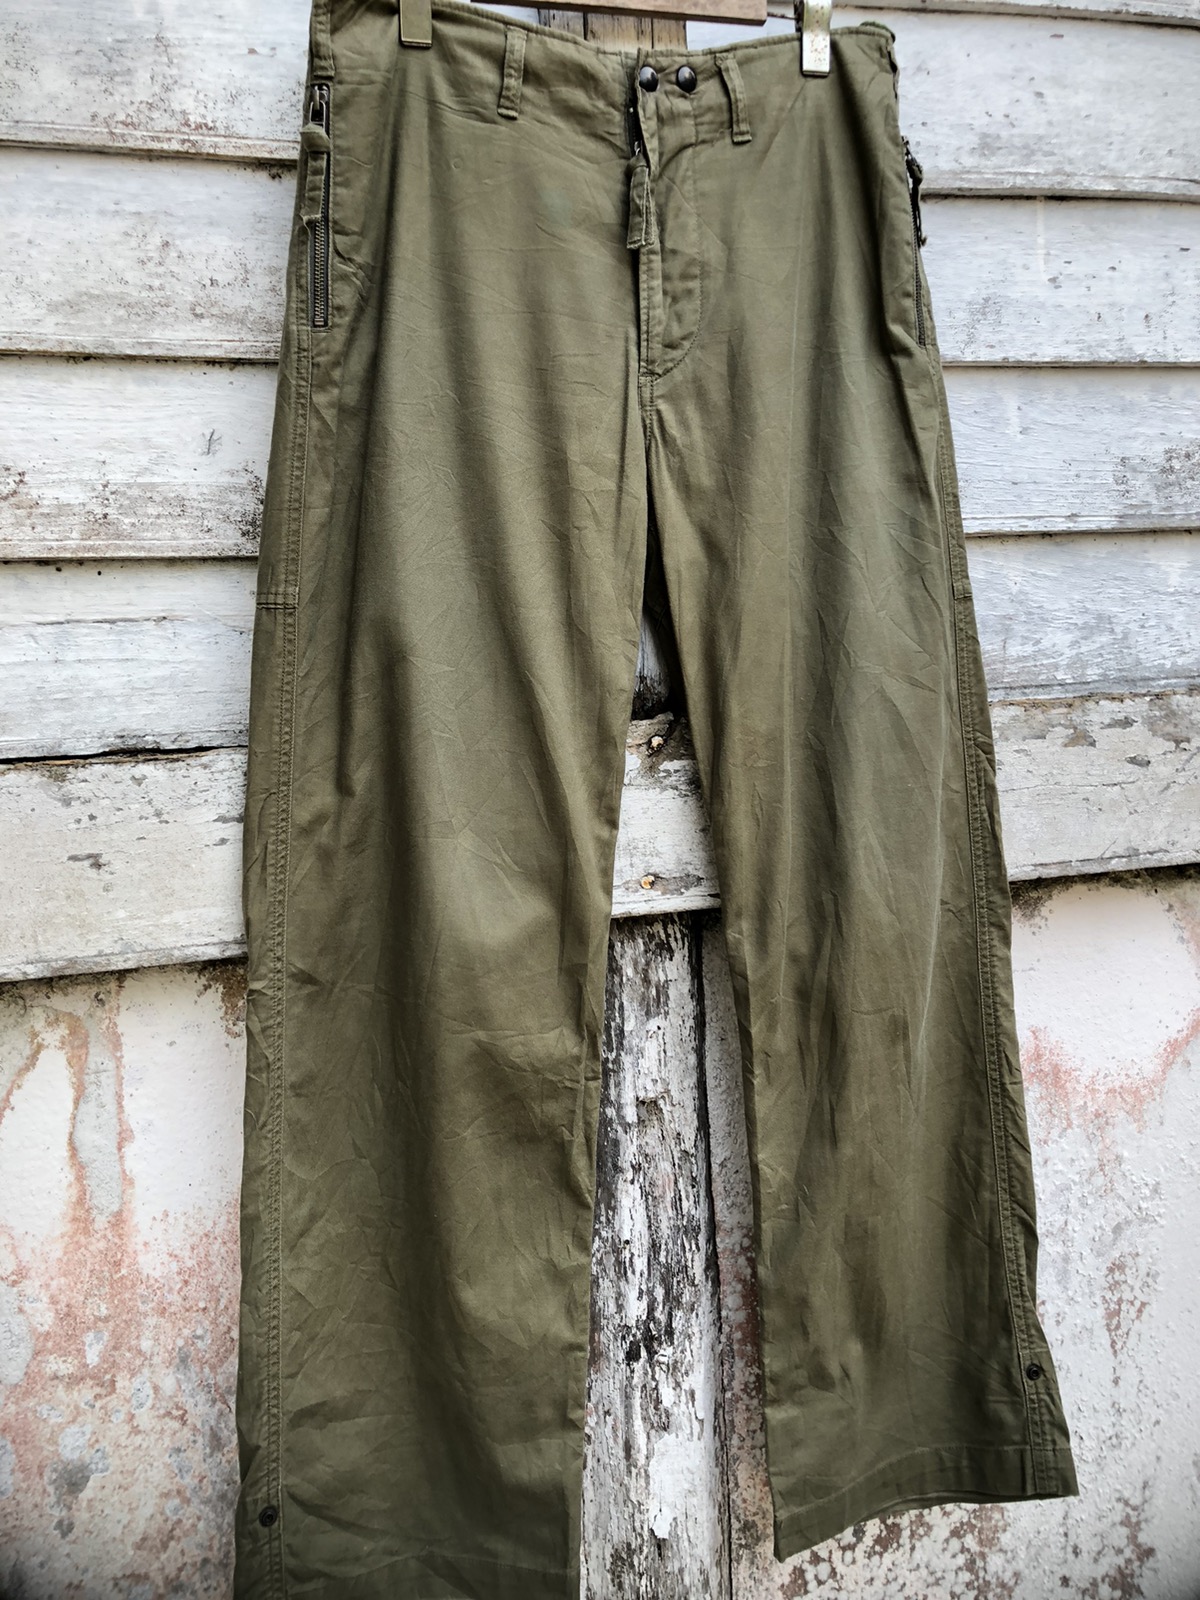 N. Hollywood Military Issues Trouser - 3